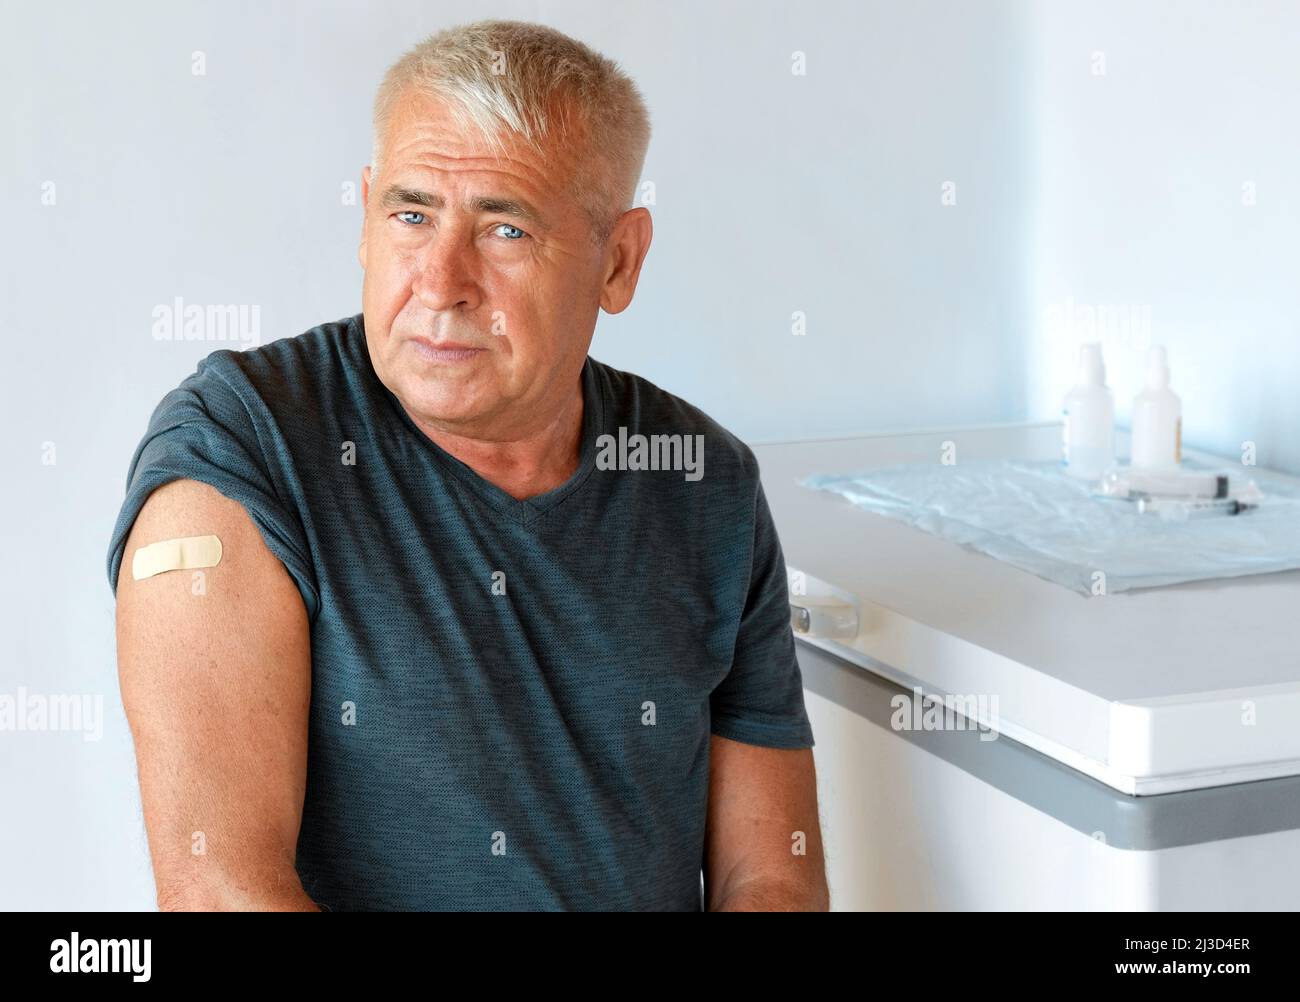 Old men after COVID-19 Vaccine. Elderly Man. Vaccine from Coronavirus. Vaccination for Older People. Senior Man showing her Arm with Bandage, Patch Stock Photo